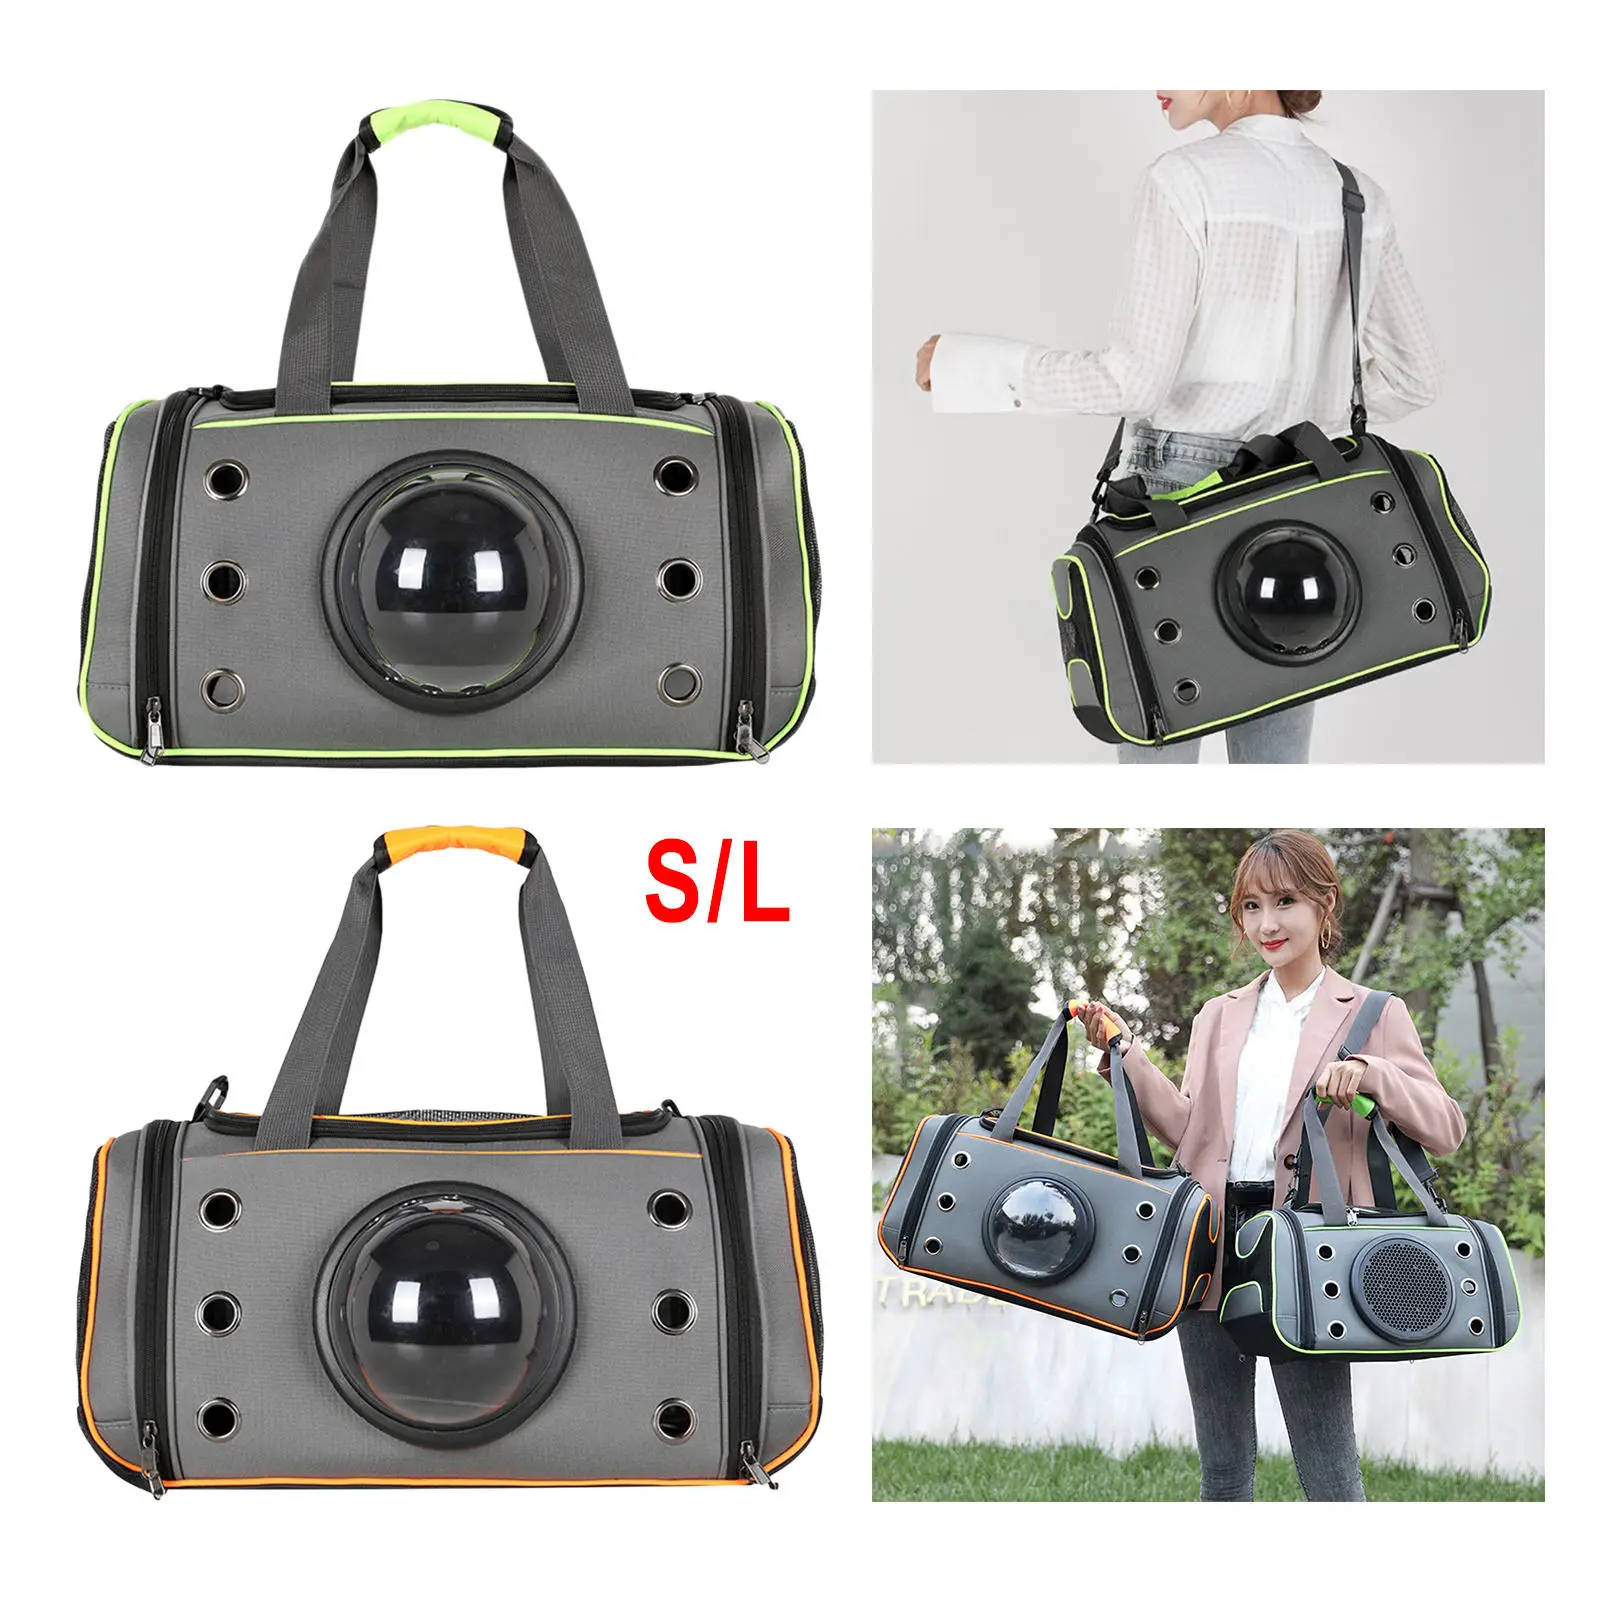 Transport Cat Carrier, Hiking Backpack Bubble Bag Travel Puppy Foldable Washable Bag